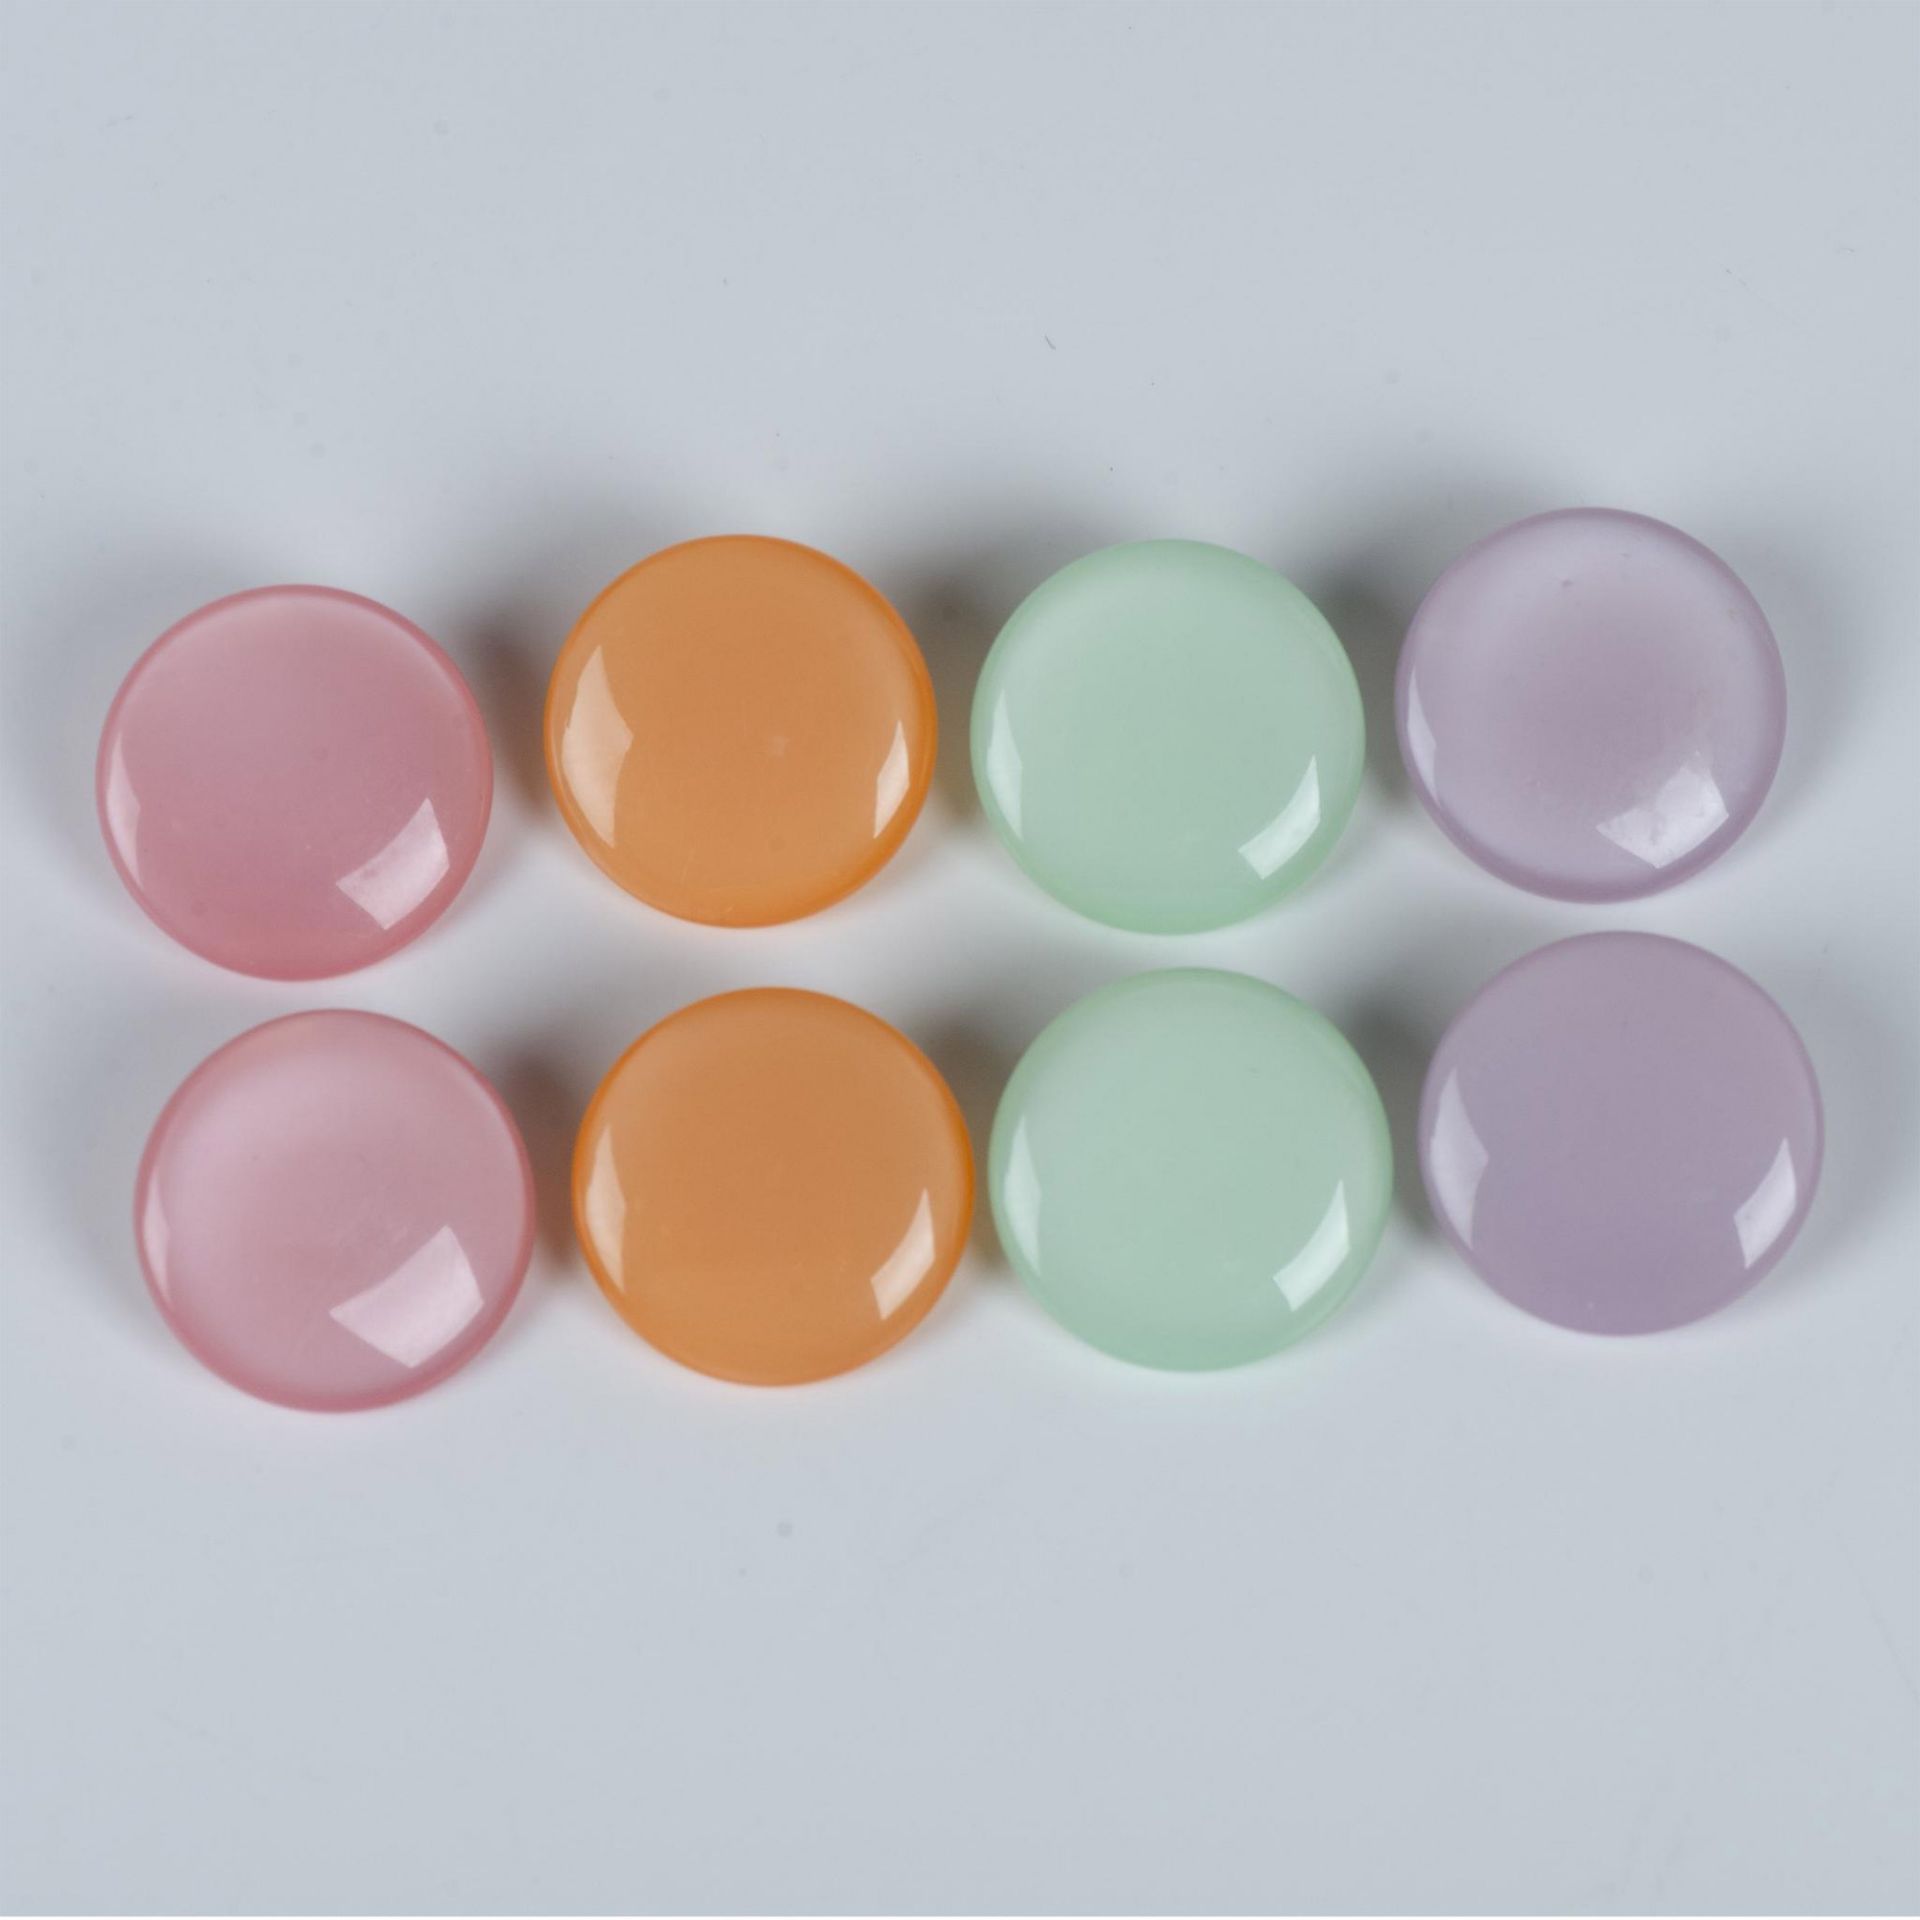 4 Pairs of Pretty Pastel Round Clip-On Earrings - Image 2 of 8